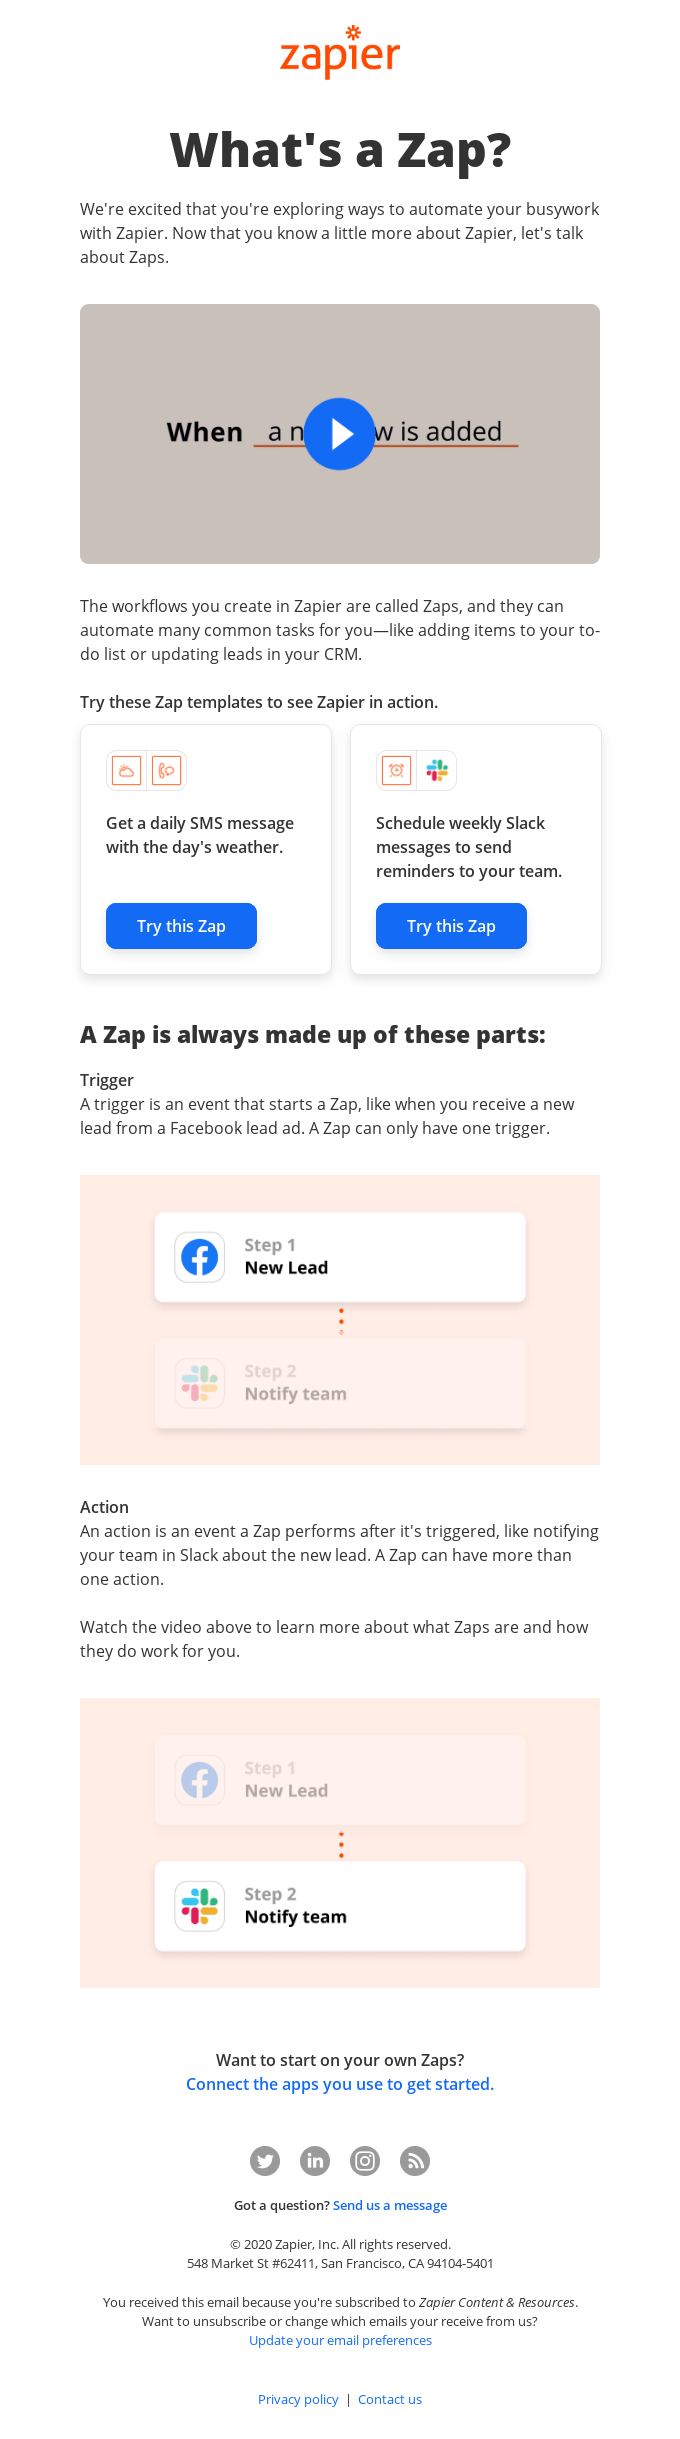 Getting started: What's a Zap?